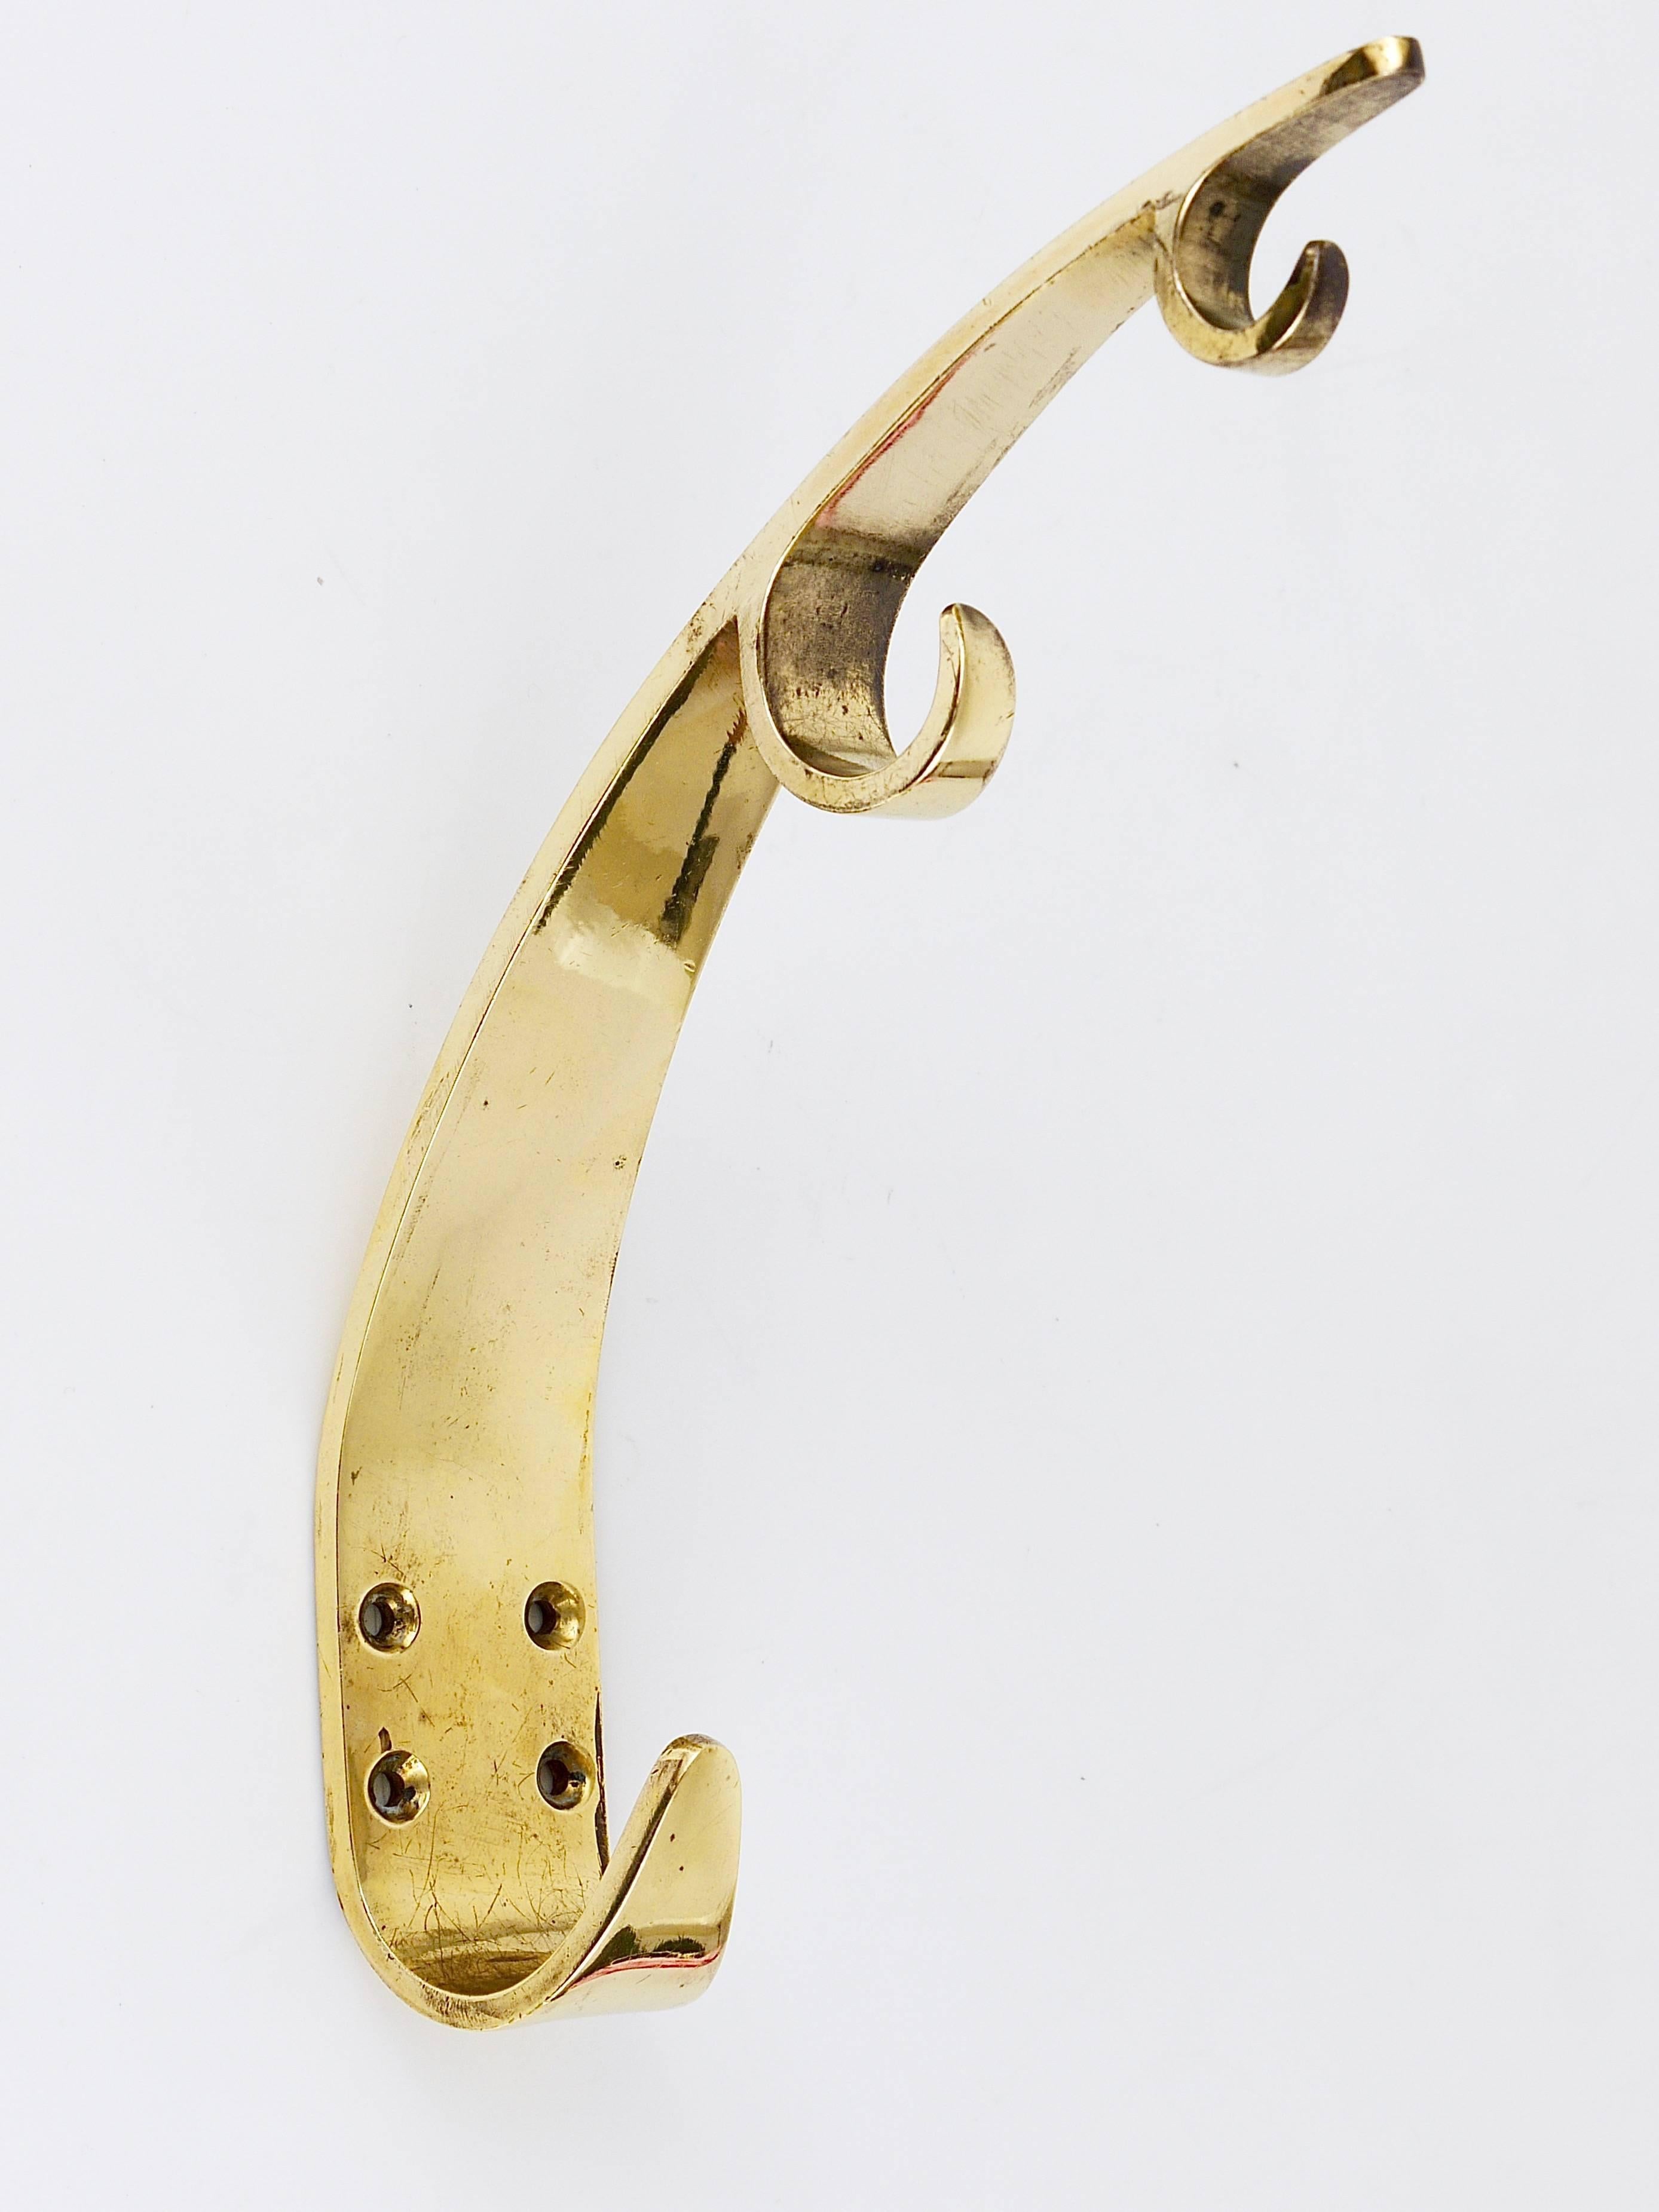 A pair of large and unusual modernist brass wall hooks, handcrafted in the 1950s by Hertha Baller, Austria. Gently polished by hand, in excellent condition with nice patina. The price is for the set of two. 